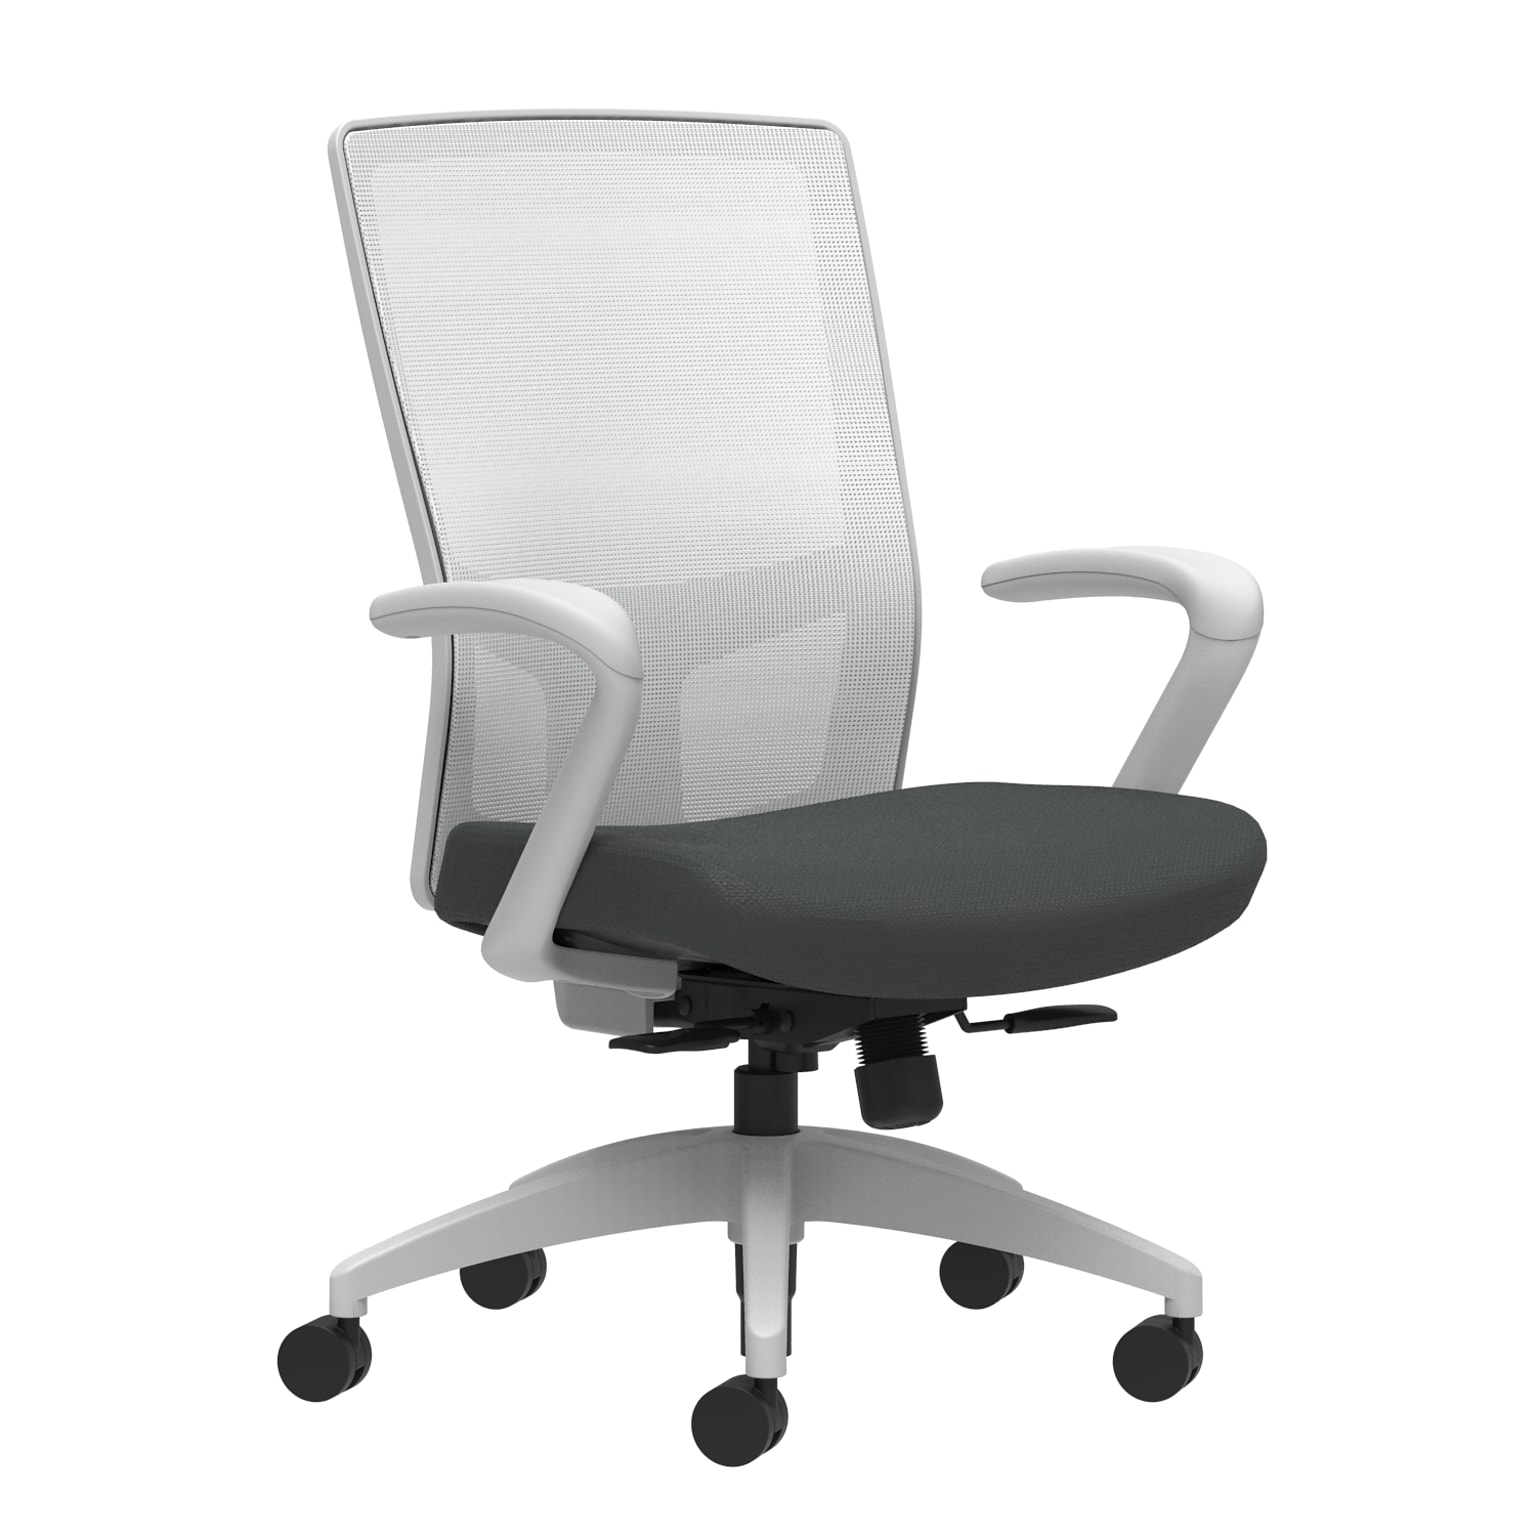 Union & Scale Workplace2.0™ Fabric Task Chair, Iron Ore, Integrated Lumbar, Fixed Arms, Synchro-Tilt with Seat Slide (53528)